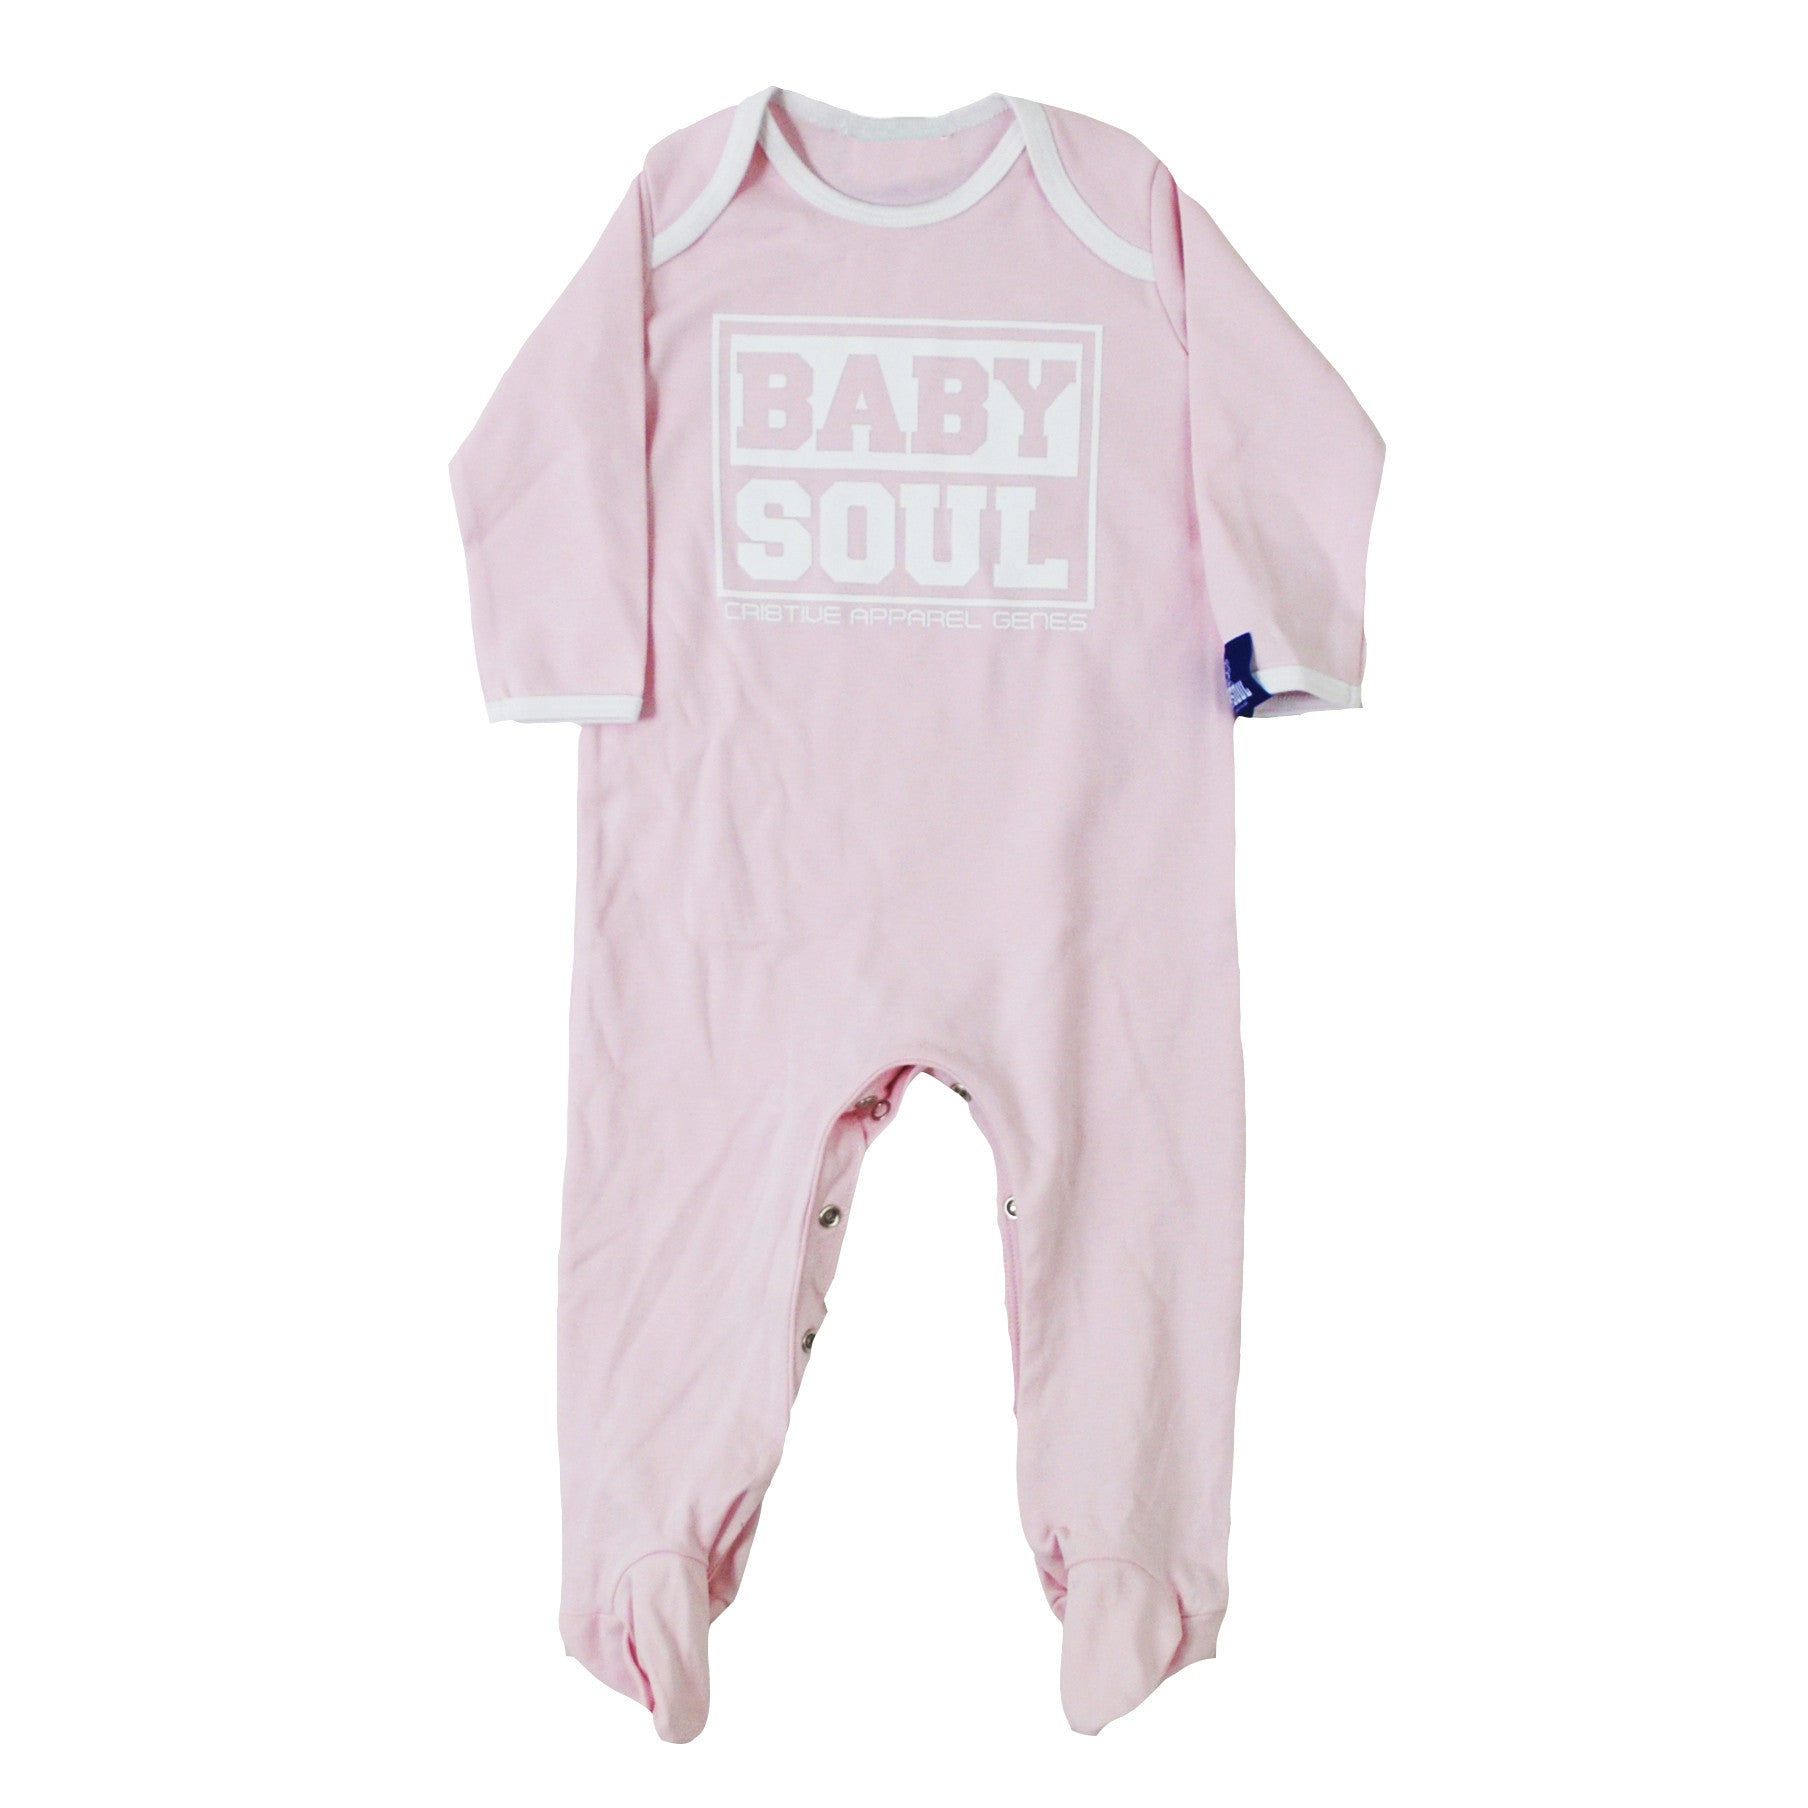 Baby Block Contrast Sleep Suit (White/Pale Pink)